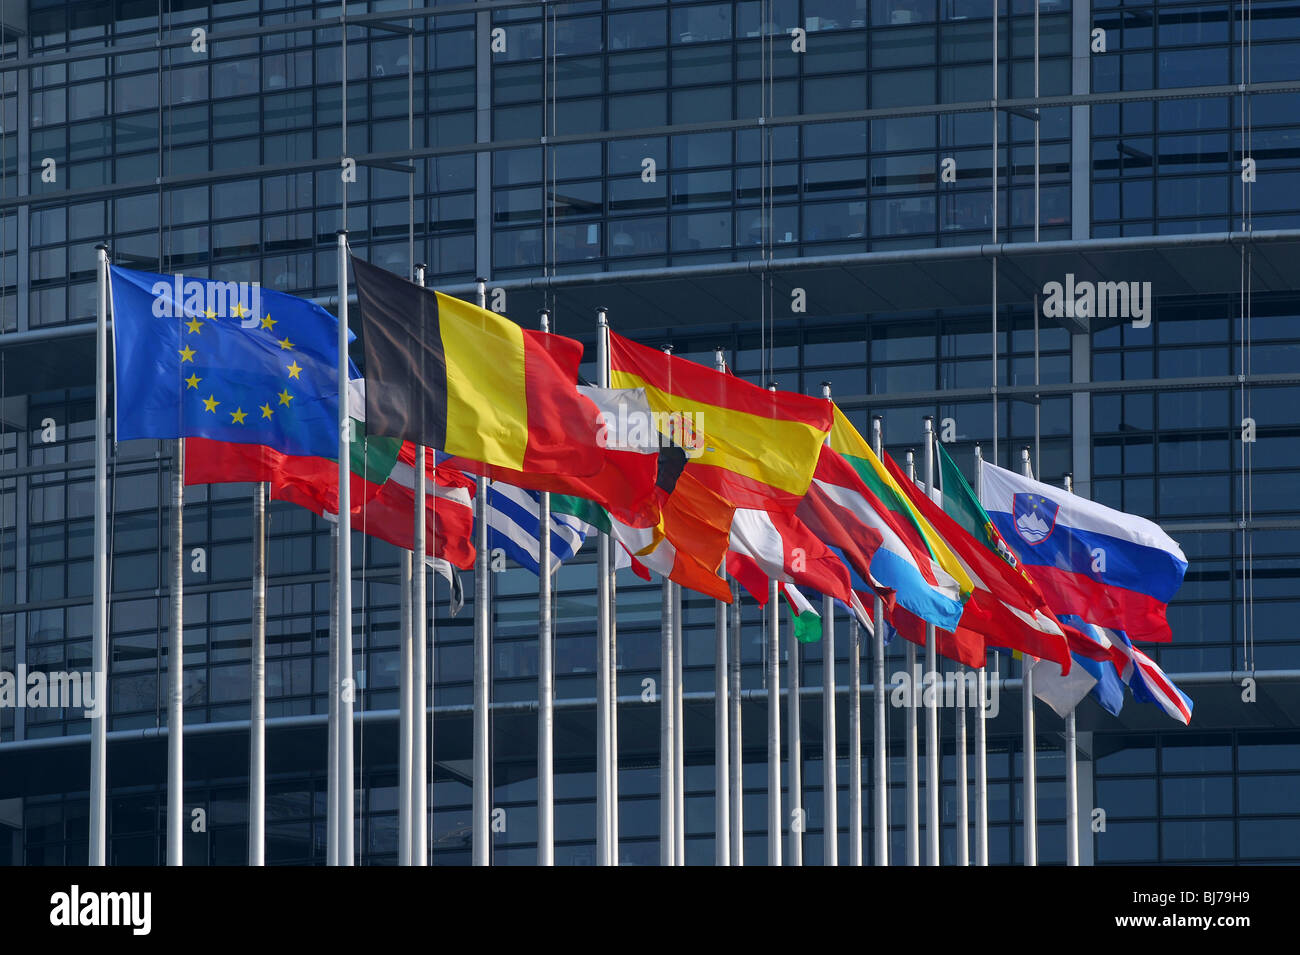 Flags of European Union member states in fornt of the European Parliament, Strasbourg, France Stock Photo